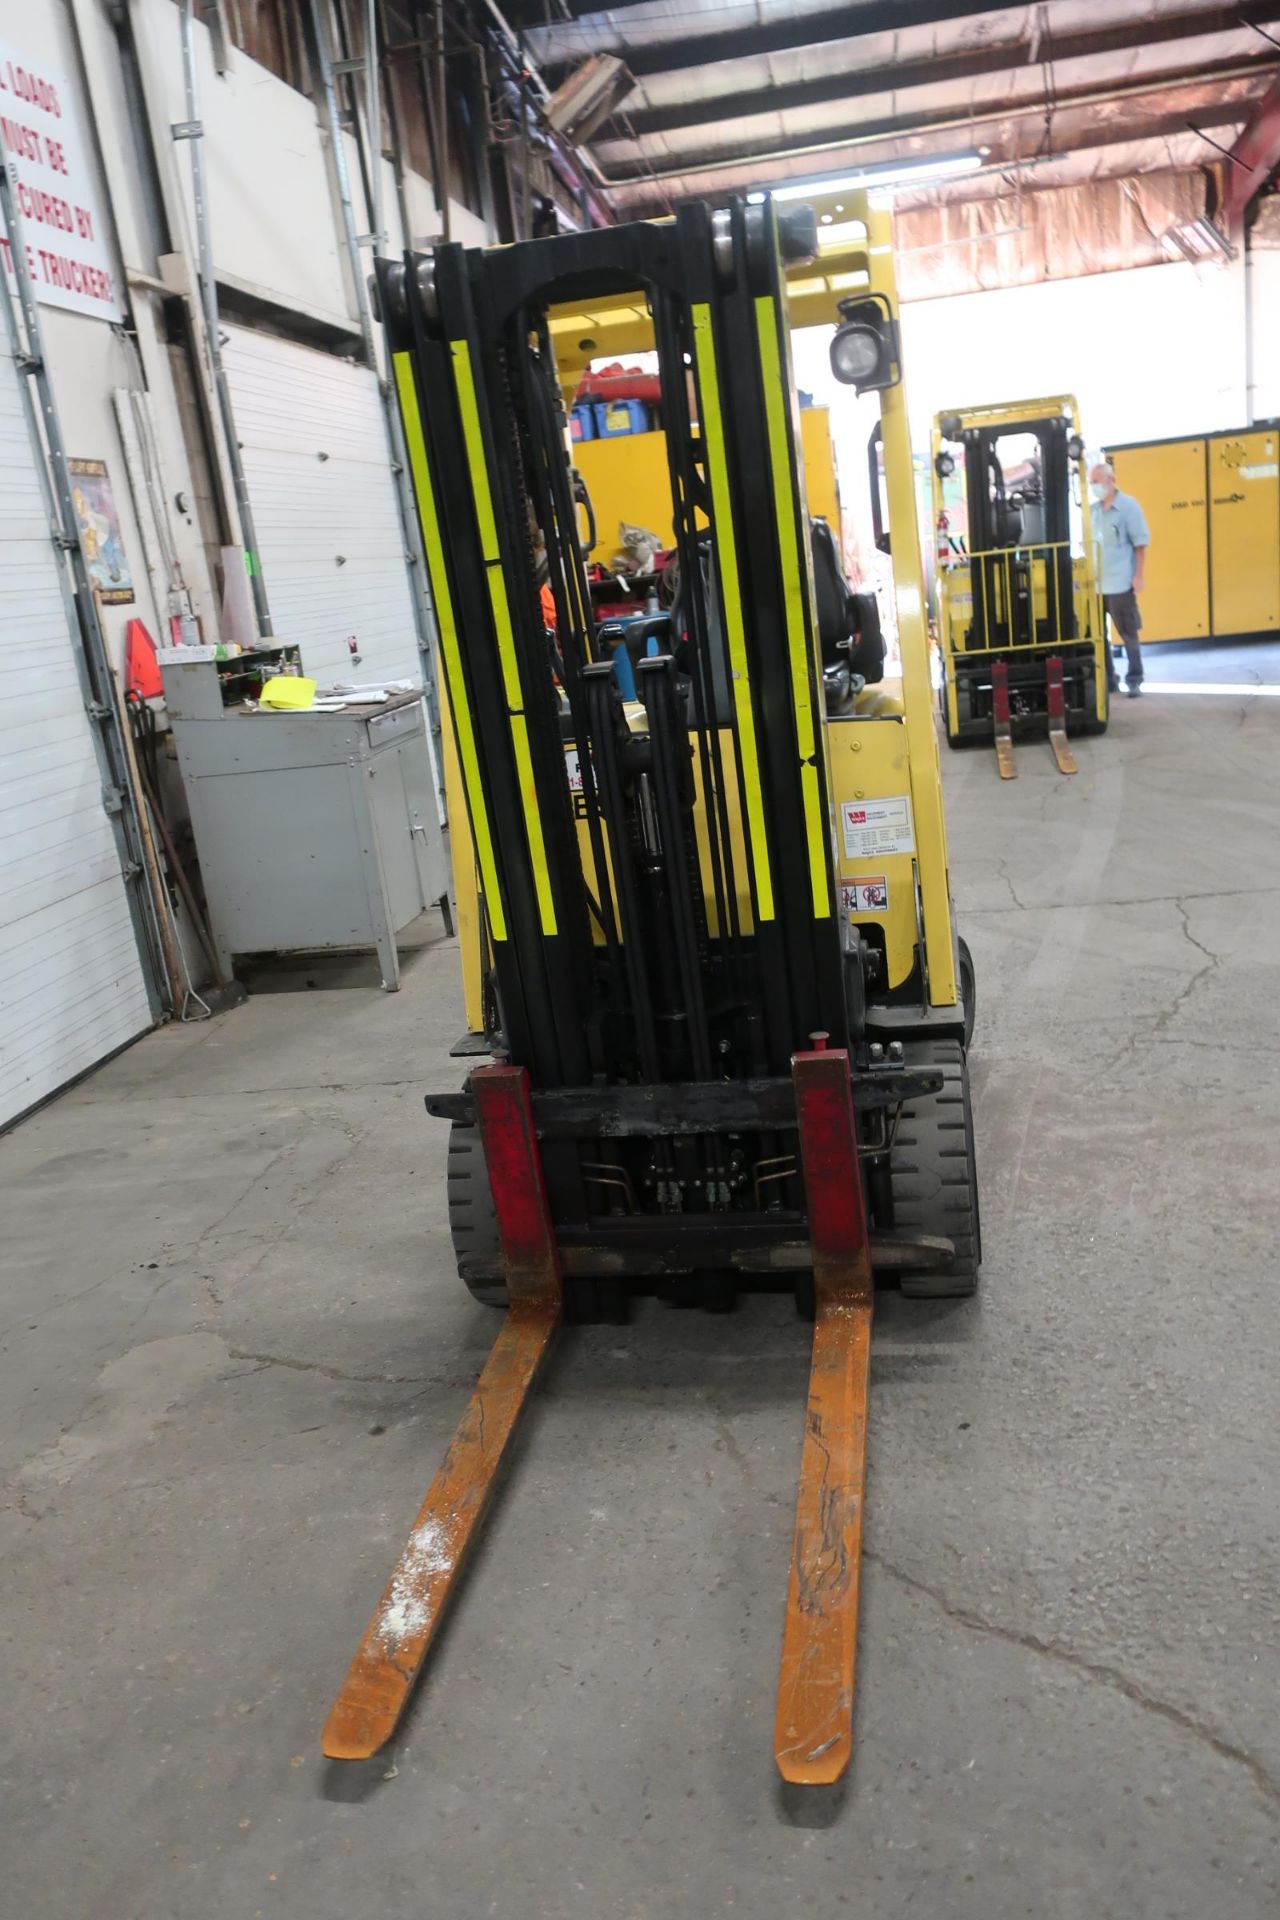 FREE CUSTOMS - 2012 Hyster 5000lbs Capacity Forklift with 3-stage mast - ELECTRIC with sideshift - Image 2 of 2